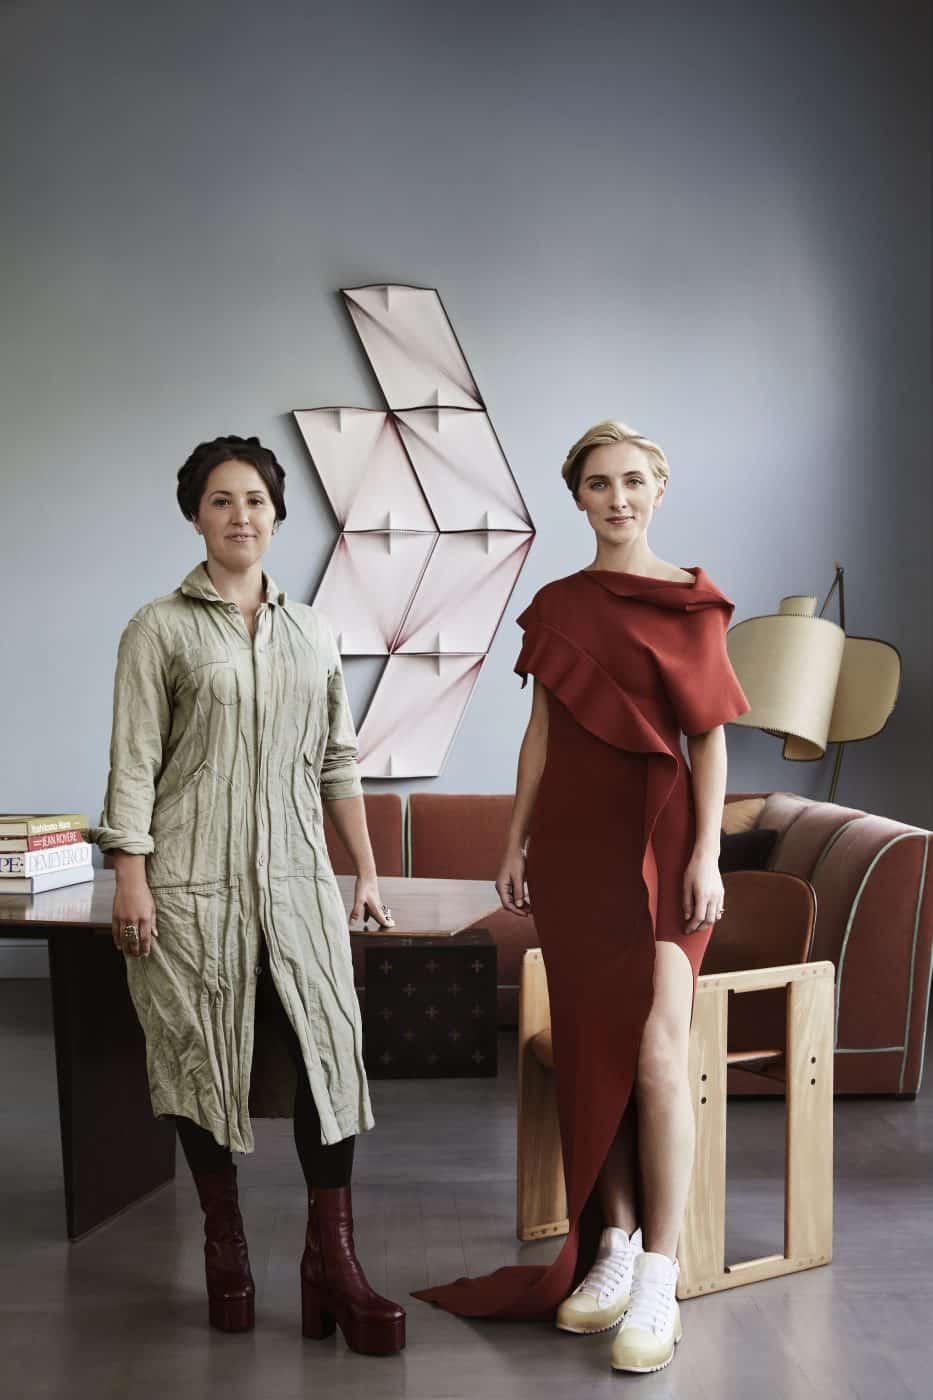 Portrait of Alexis Tompkins and Leann Conquer of interiors firm Chroma